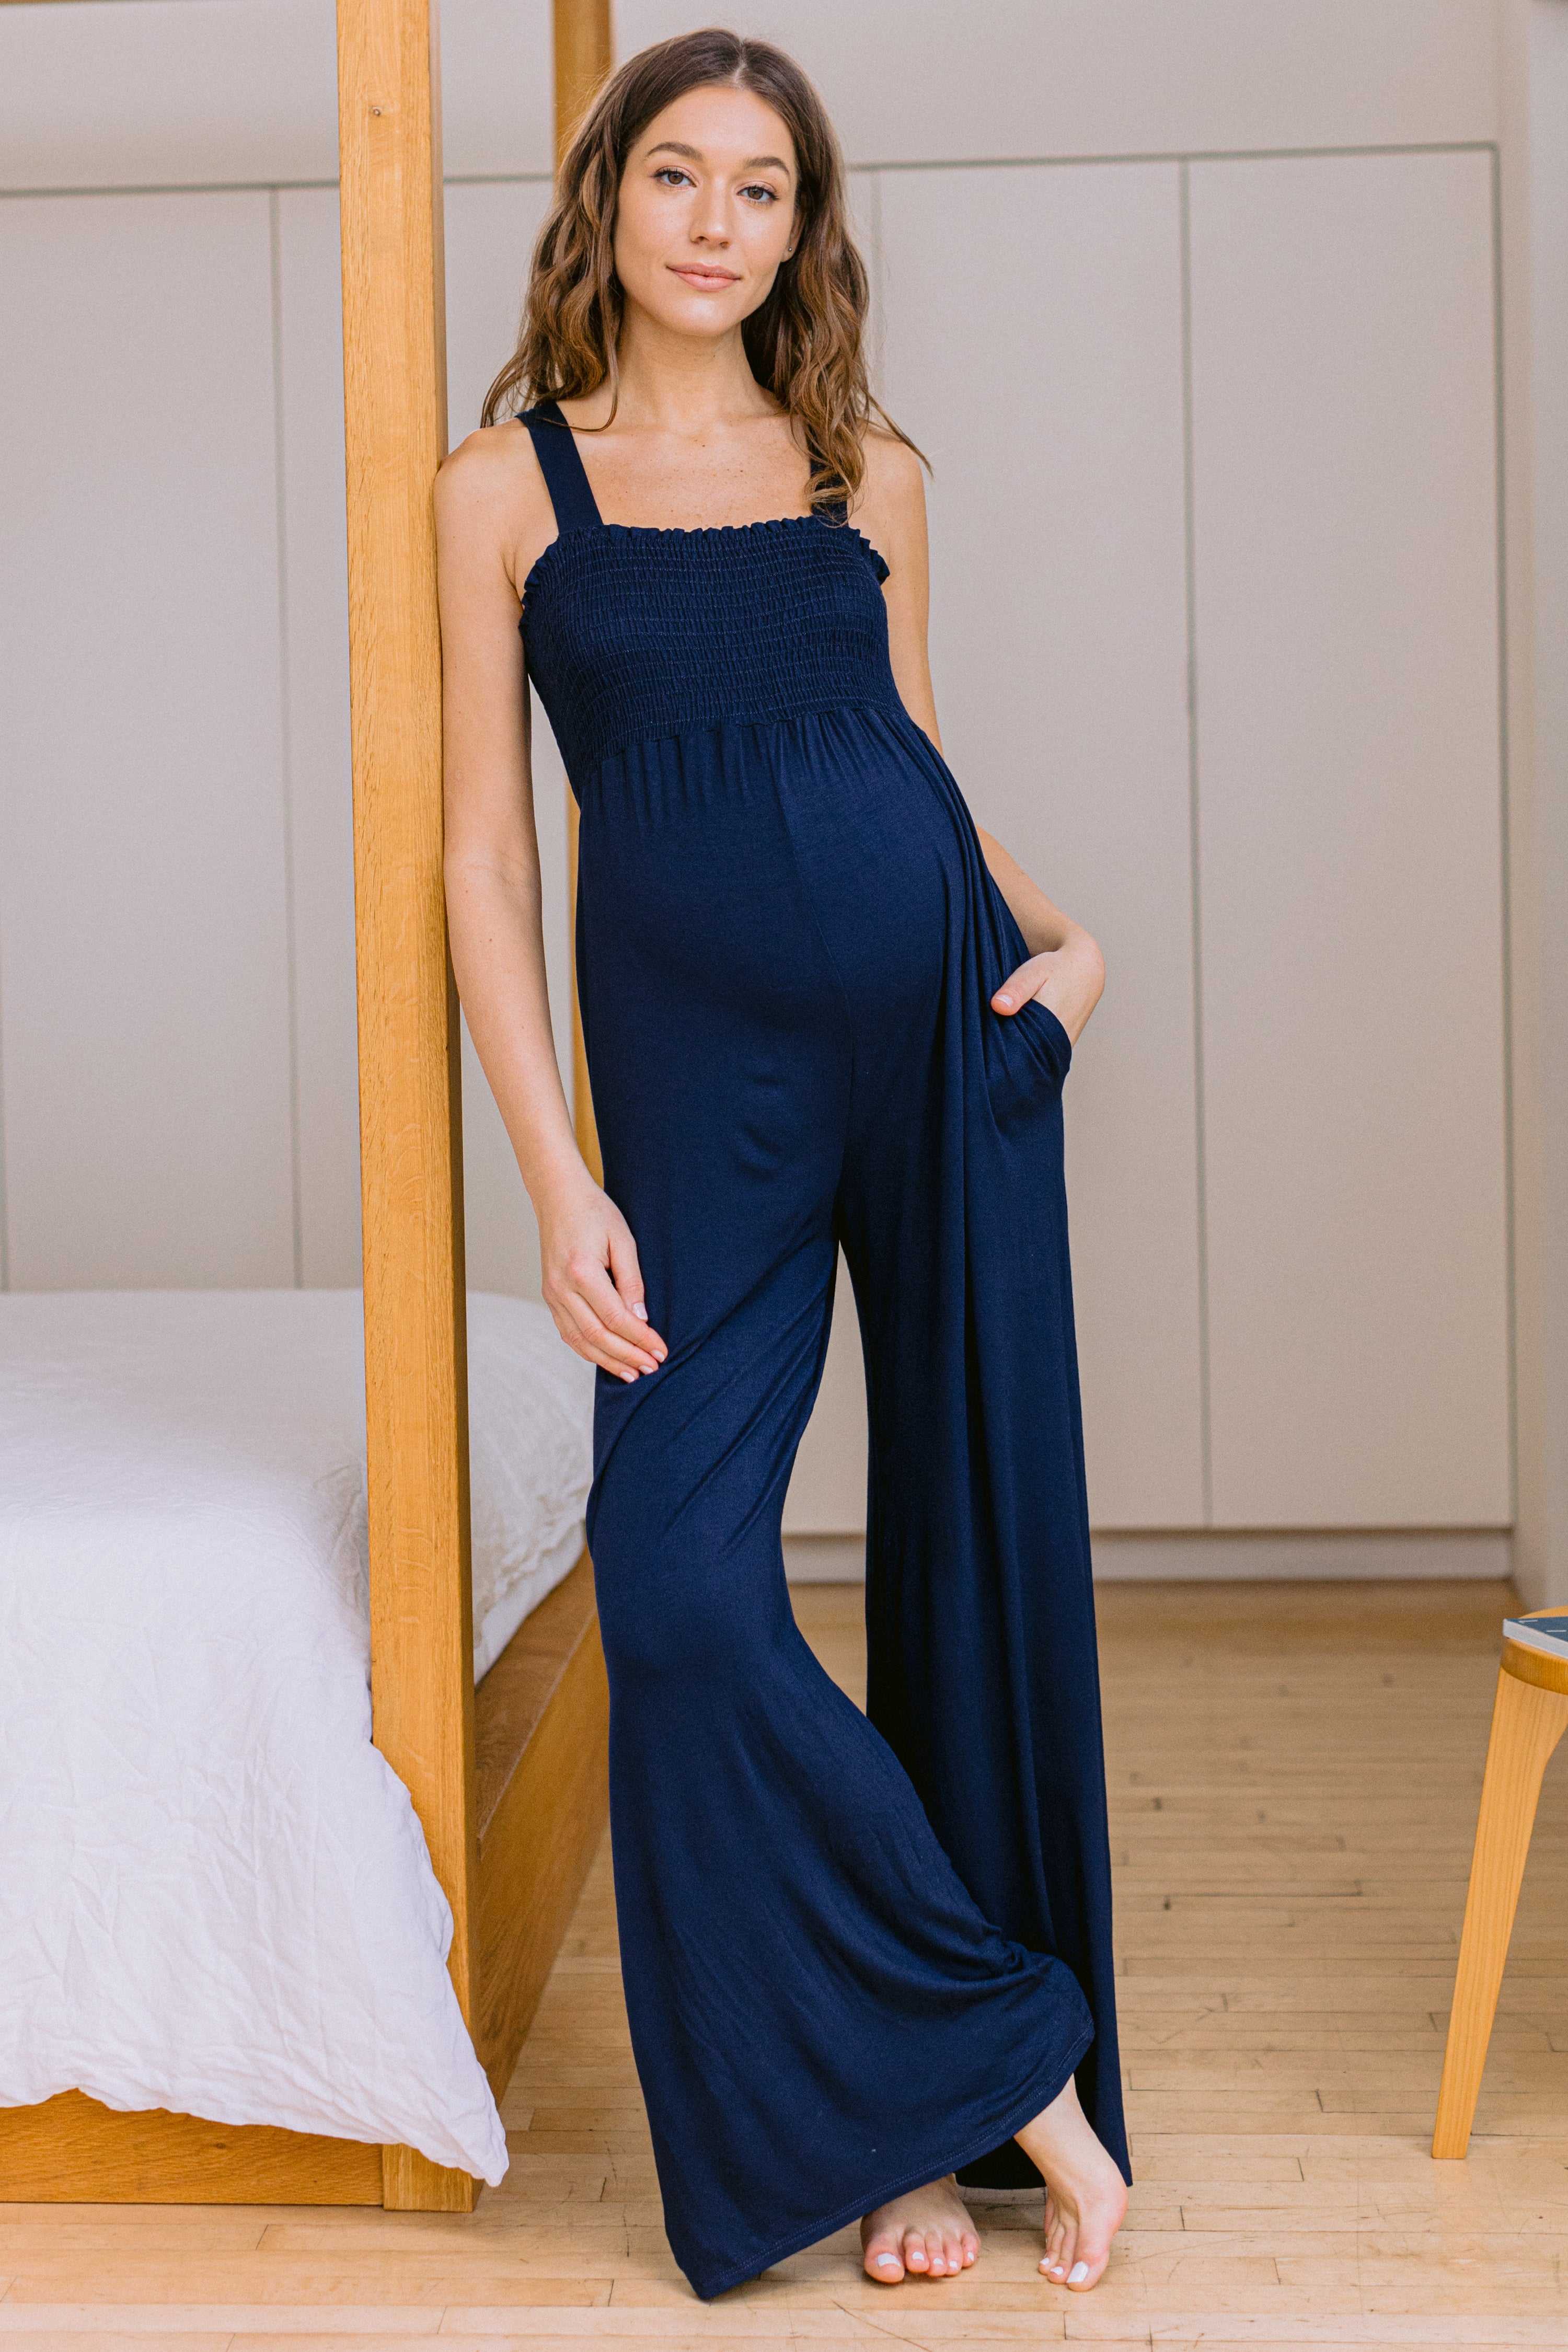 Essential Grey Womens Maternity Do-It-All Jumpsuit | skiphop.com